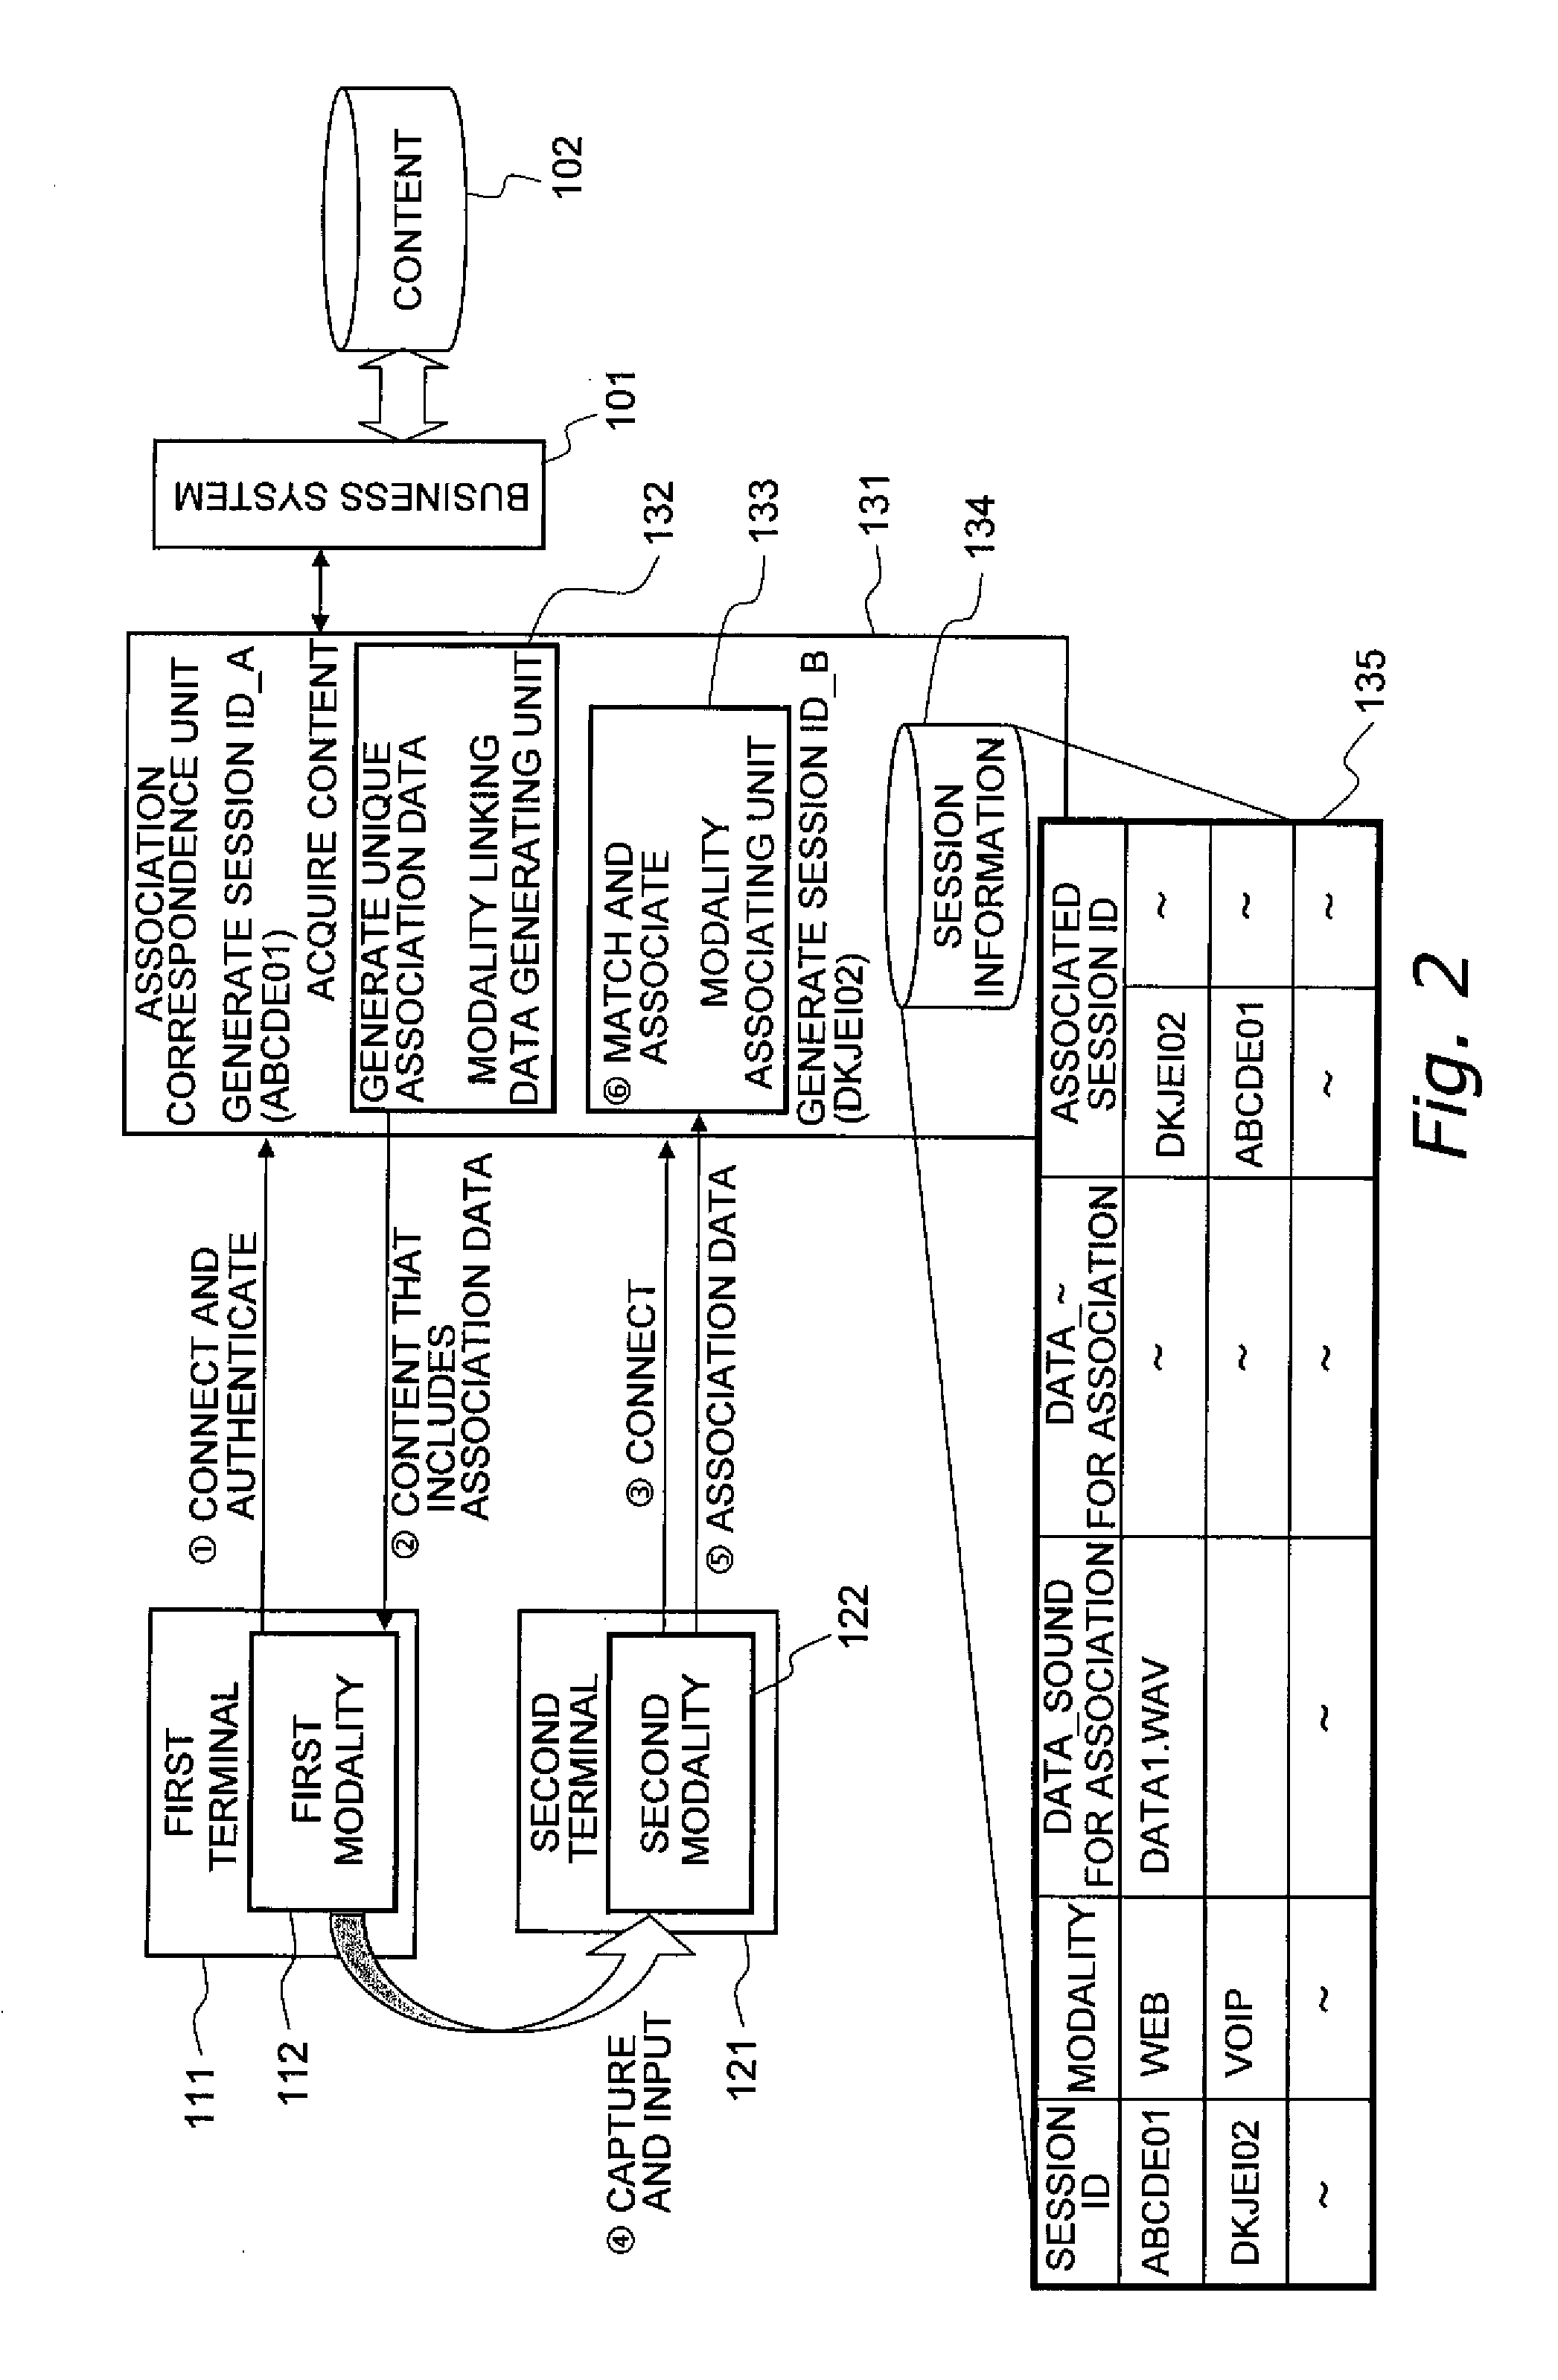 Method of associating multiple modalities and a multimodal system